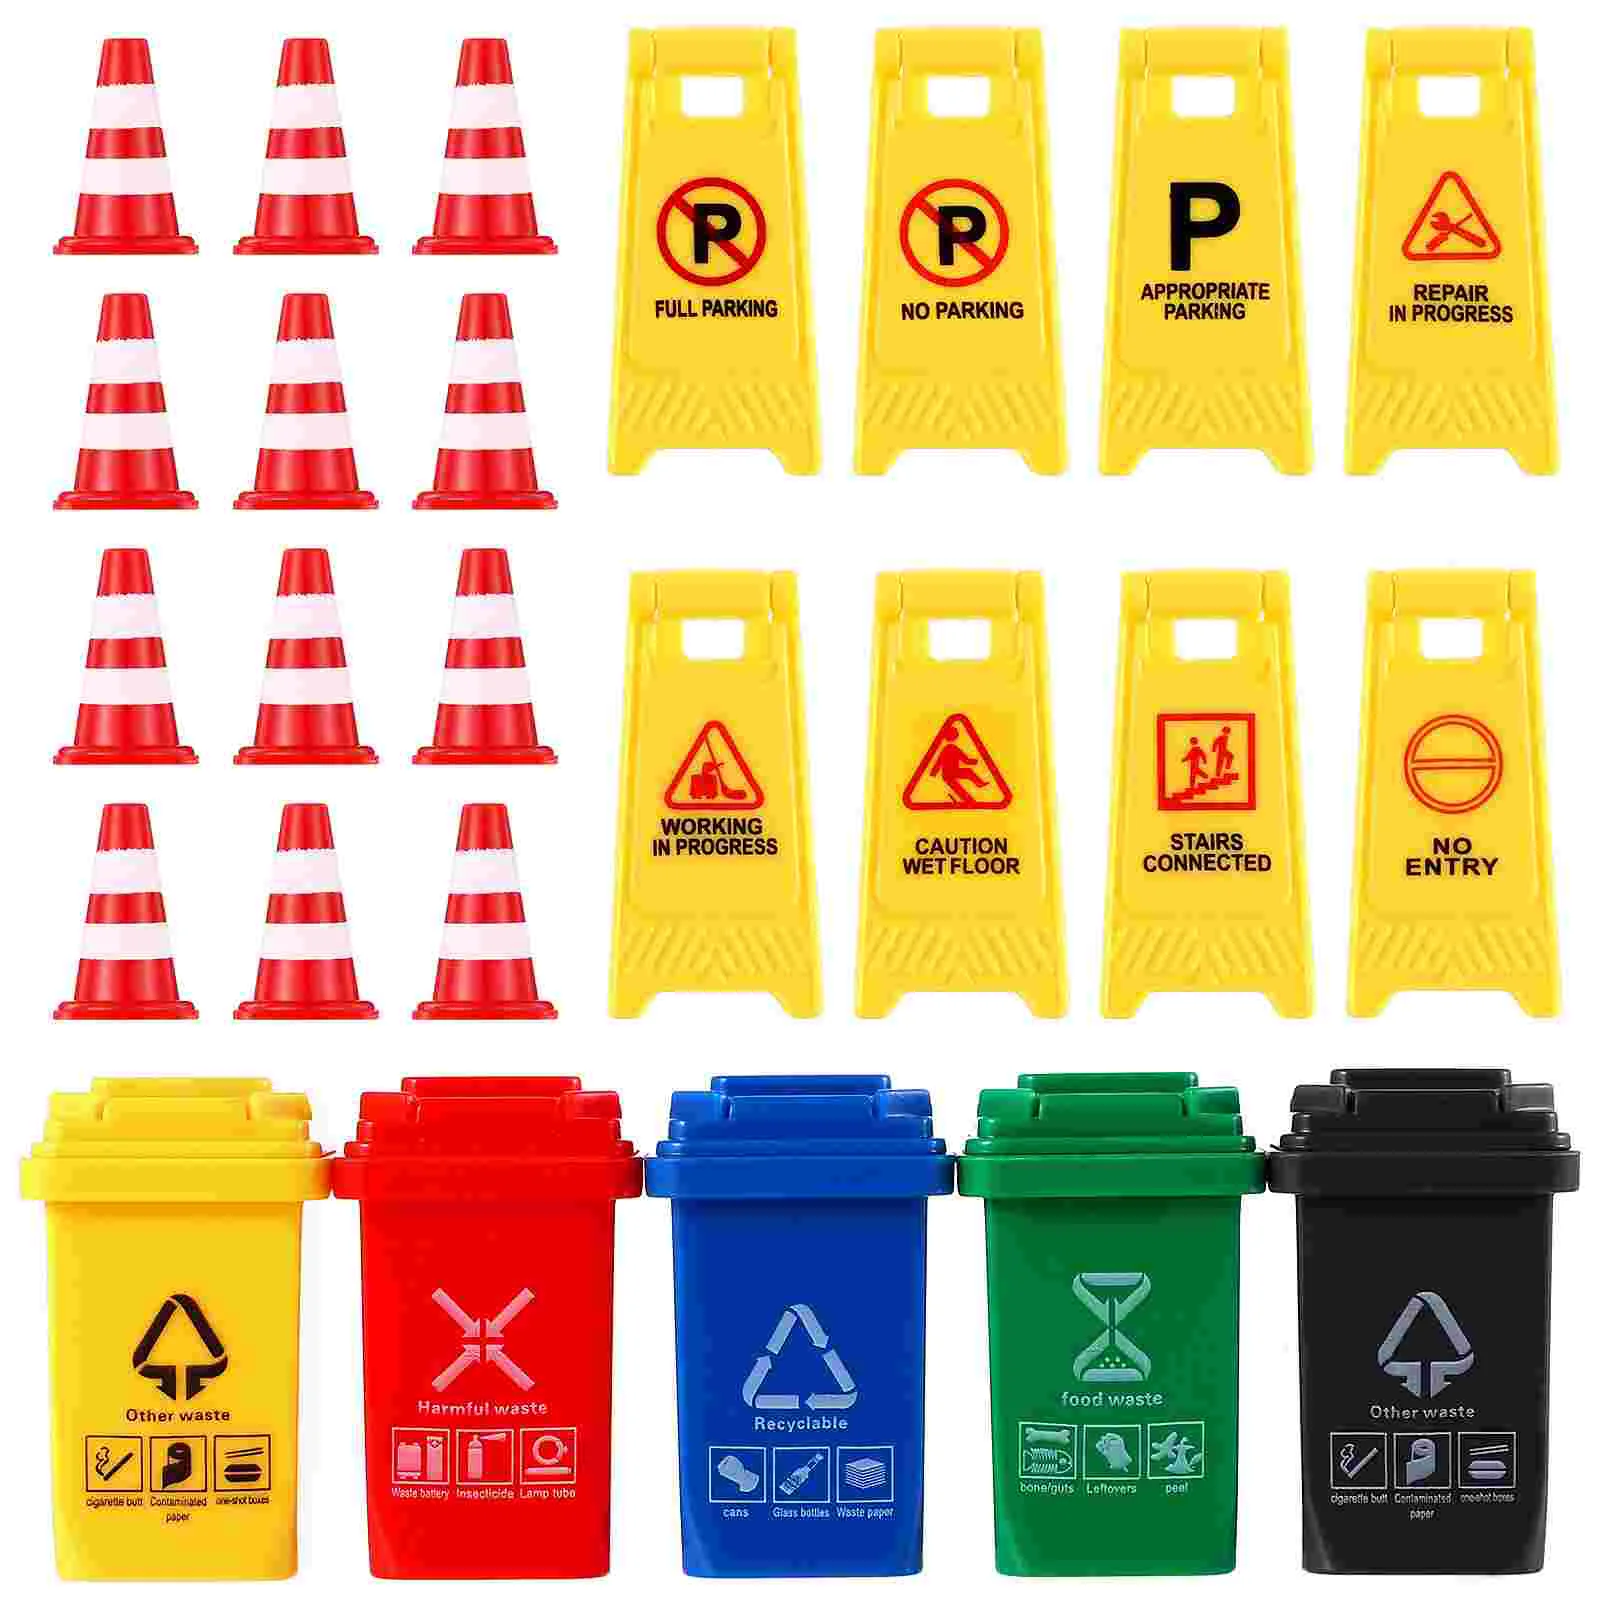 

25 Pcs Teaching Cognitive Toys Kid Traffic Signs Ornament Cone Trash Cans Road Game Plastic Child